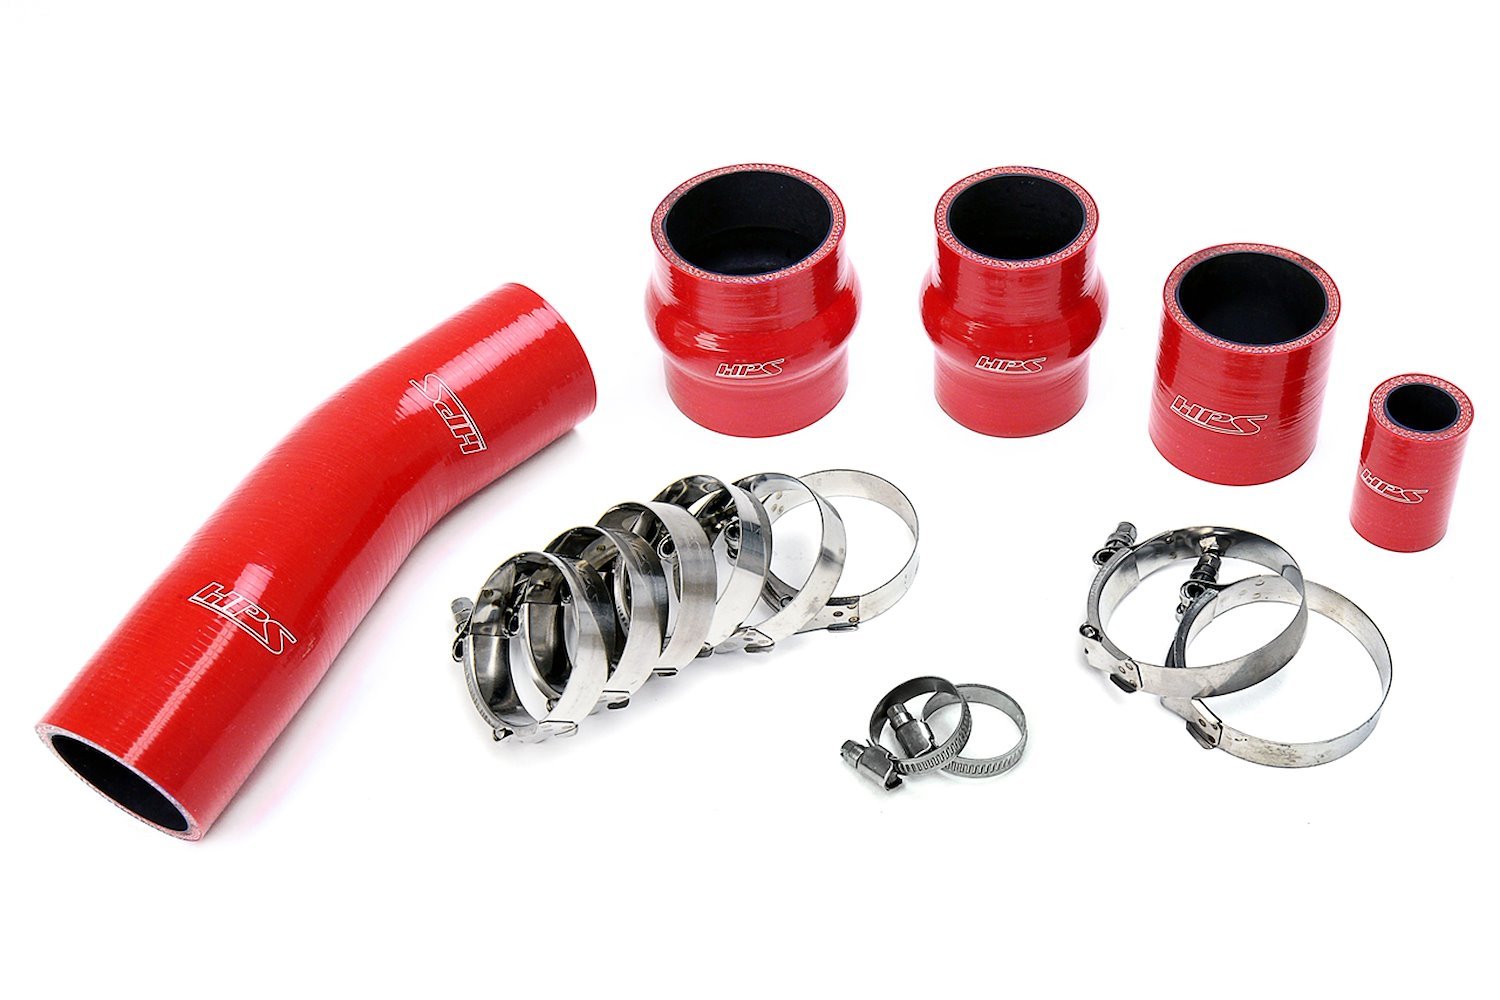 57-1711-RED Intercooler Hose Kit, High-Temp 4-Ply Reinforced Silicone, Replace OEM Rubber Intercooler Turbo Boots